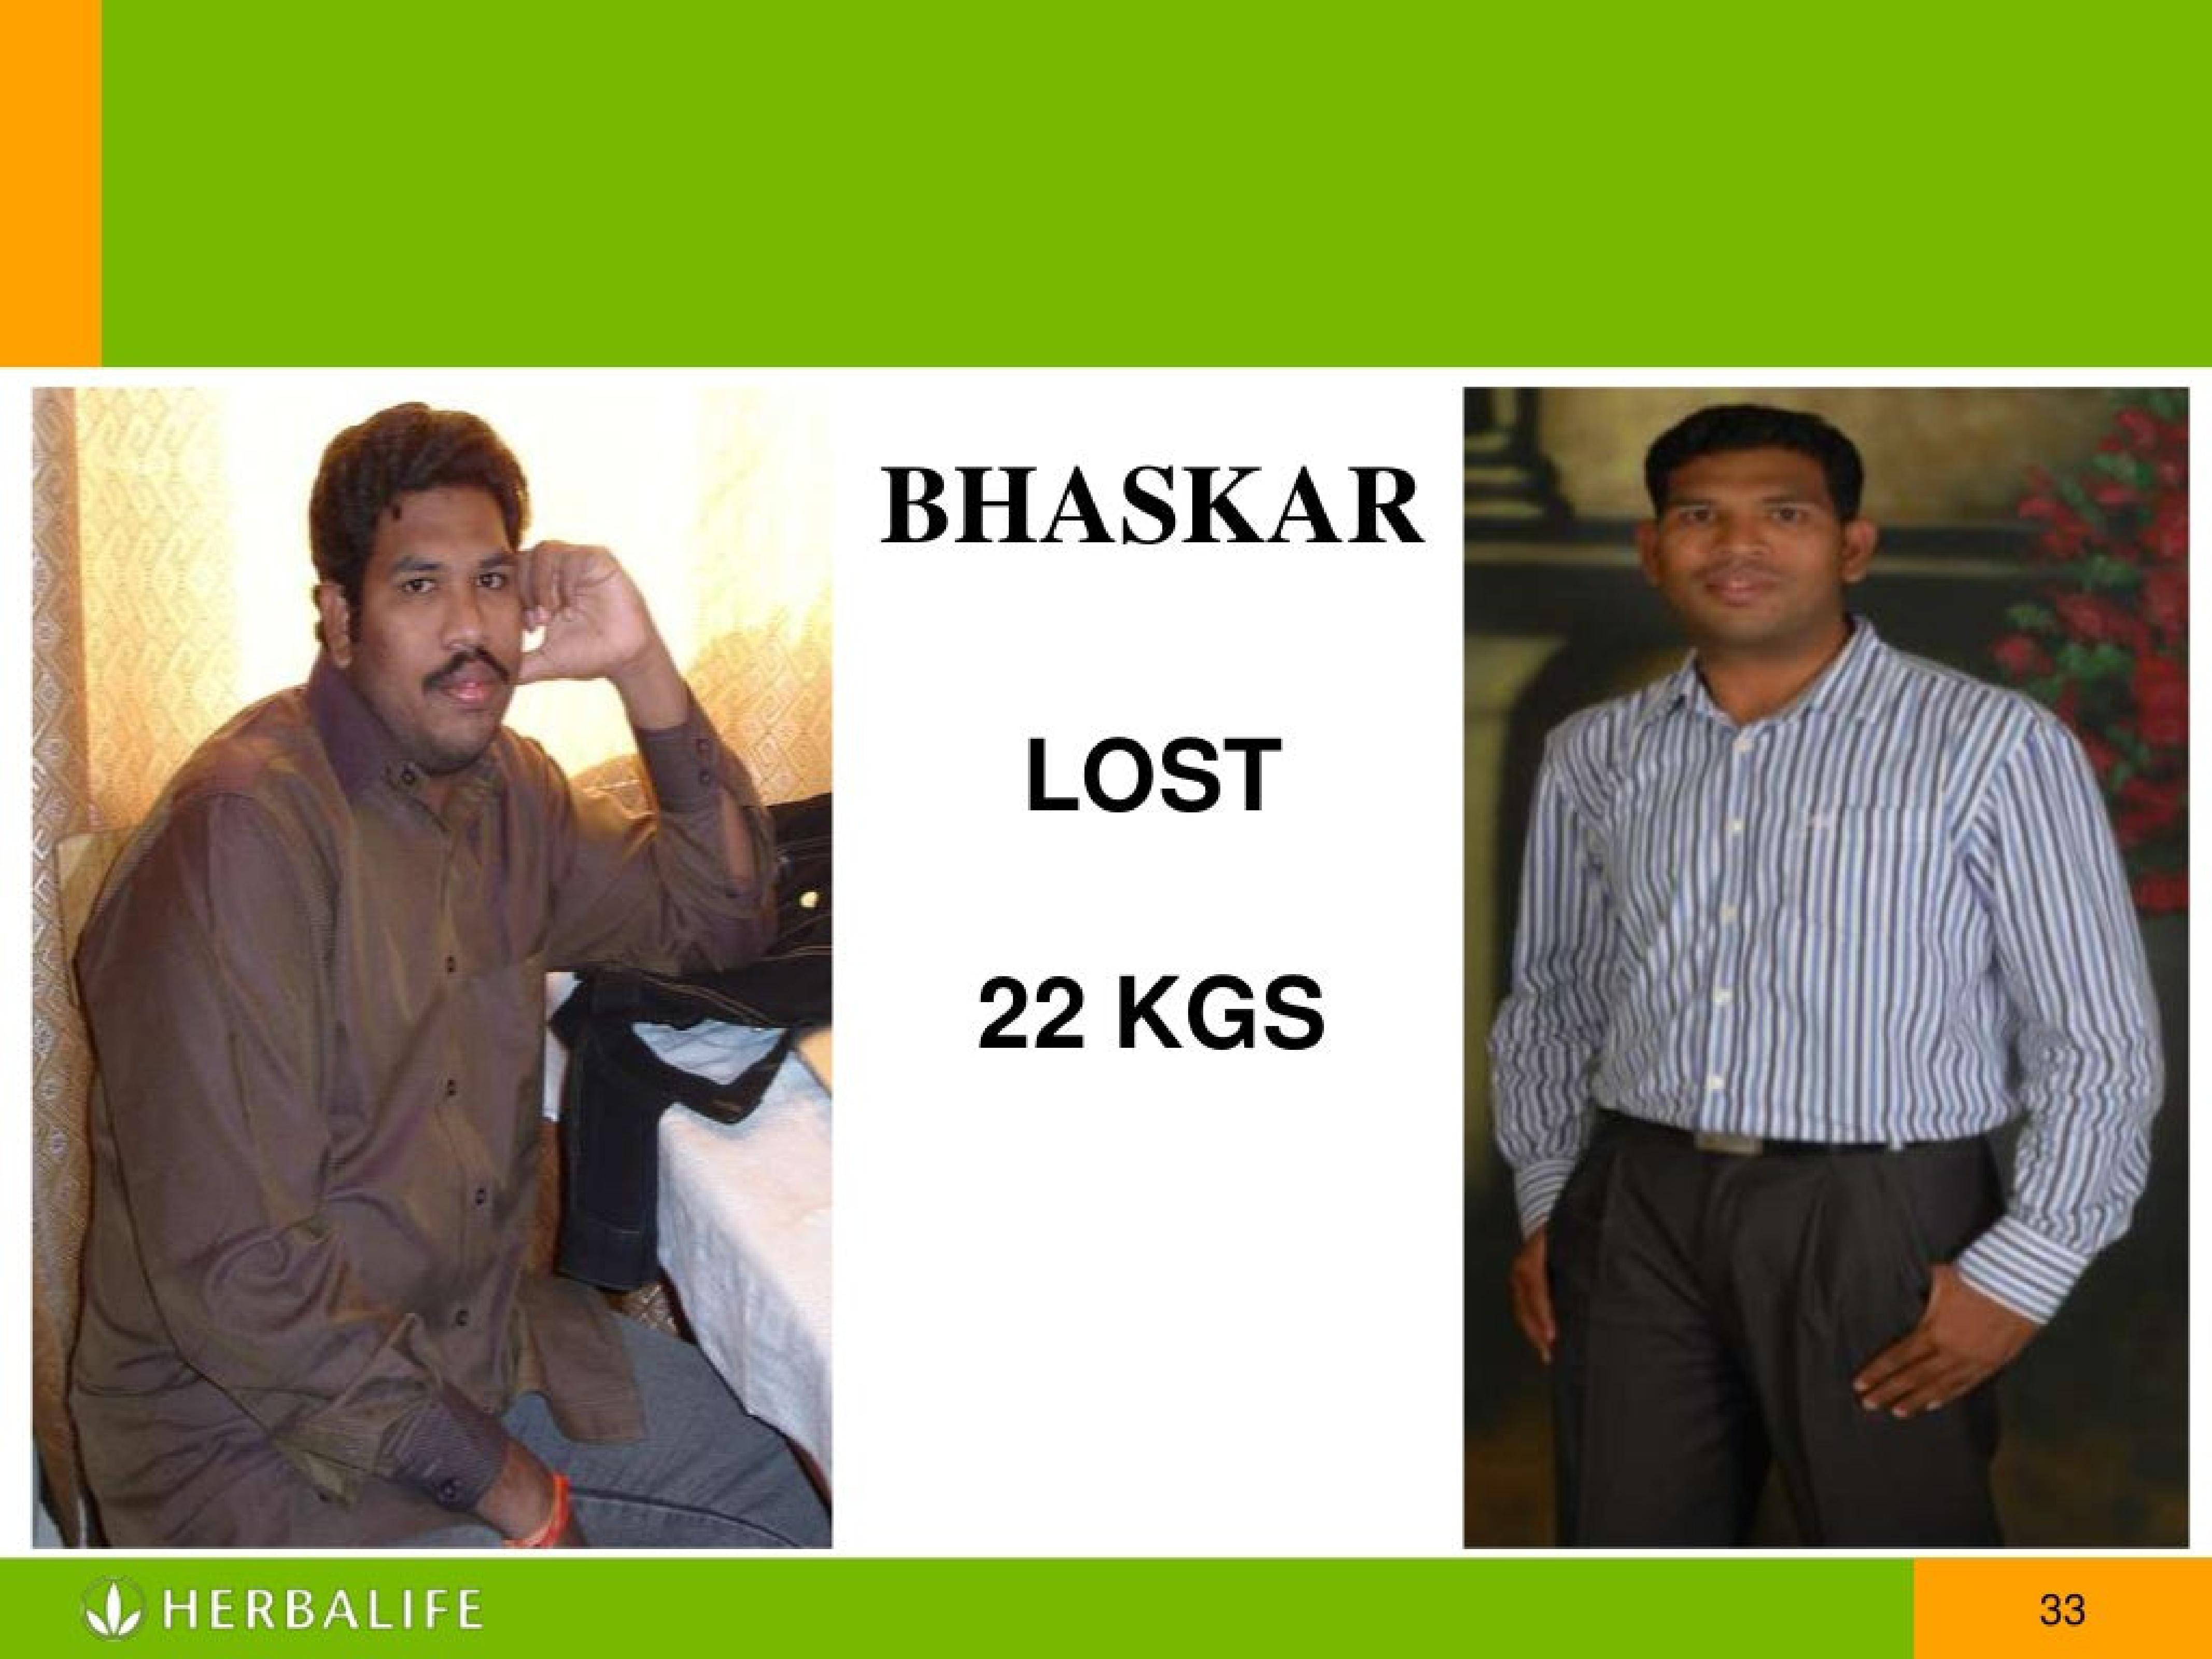 Herbalife Medipally Hyderabad 9160255159,Hyderabad,Services,Free Classifieds,Post Free Ads,77traders.com